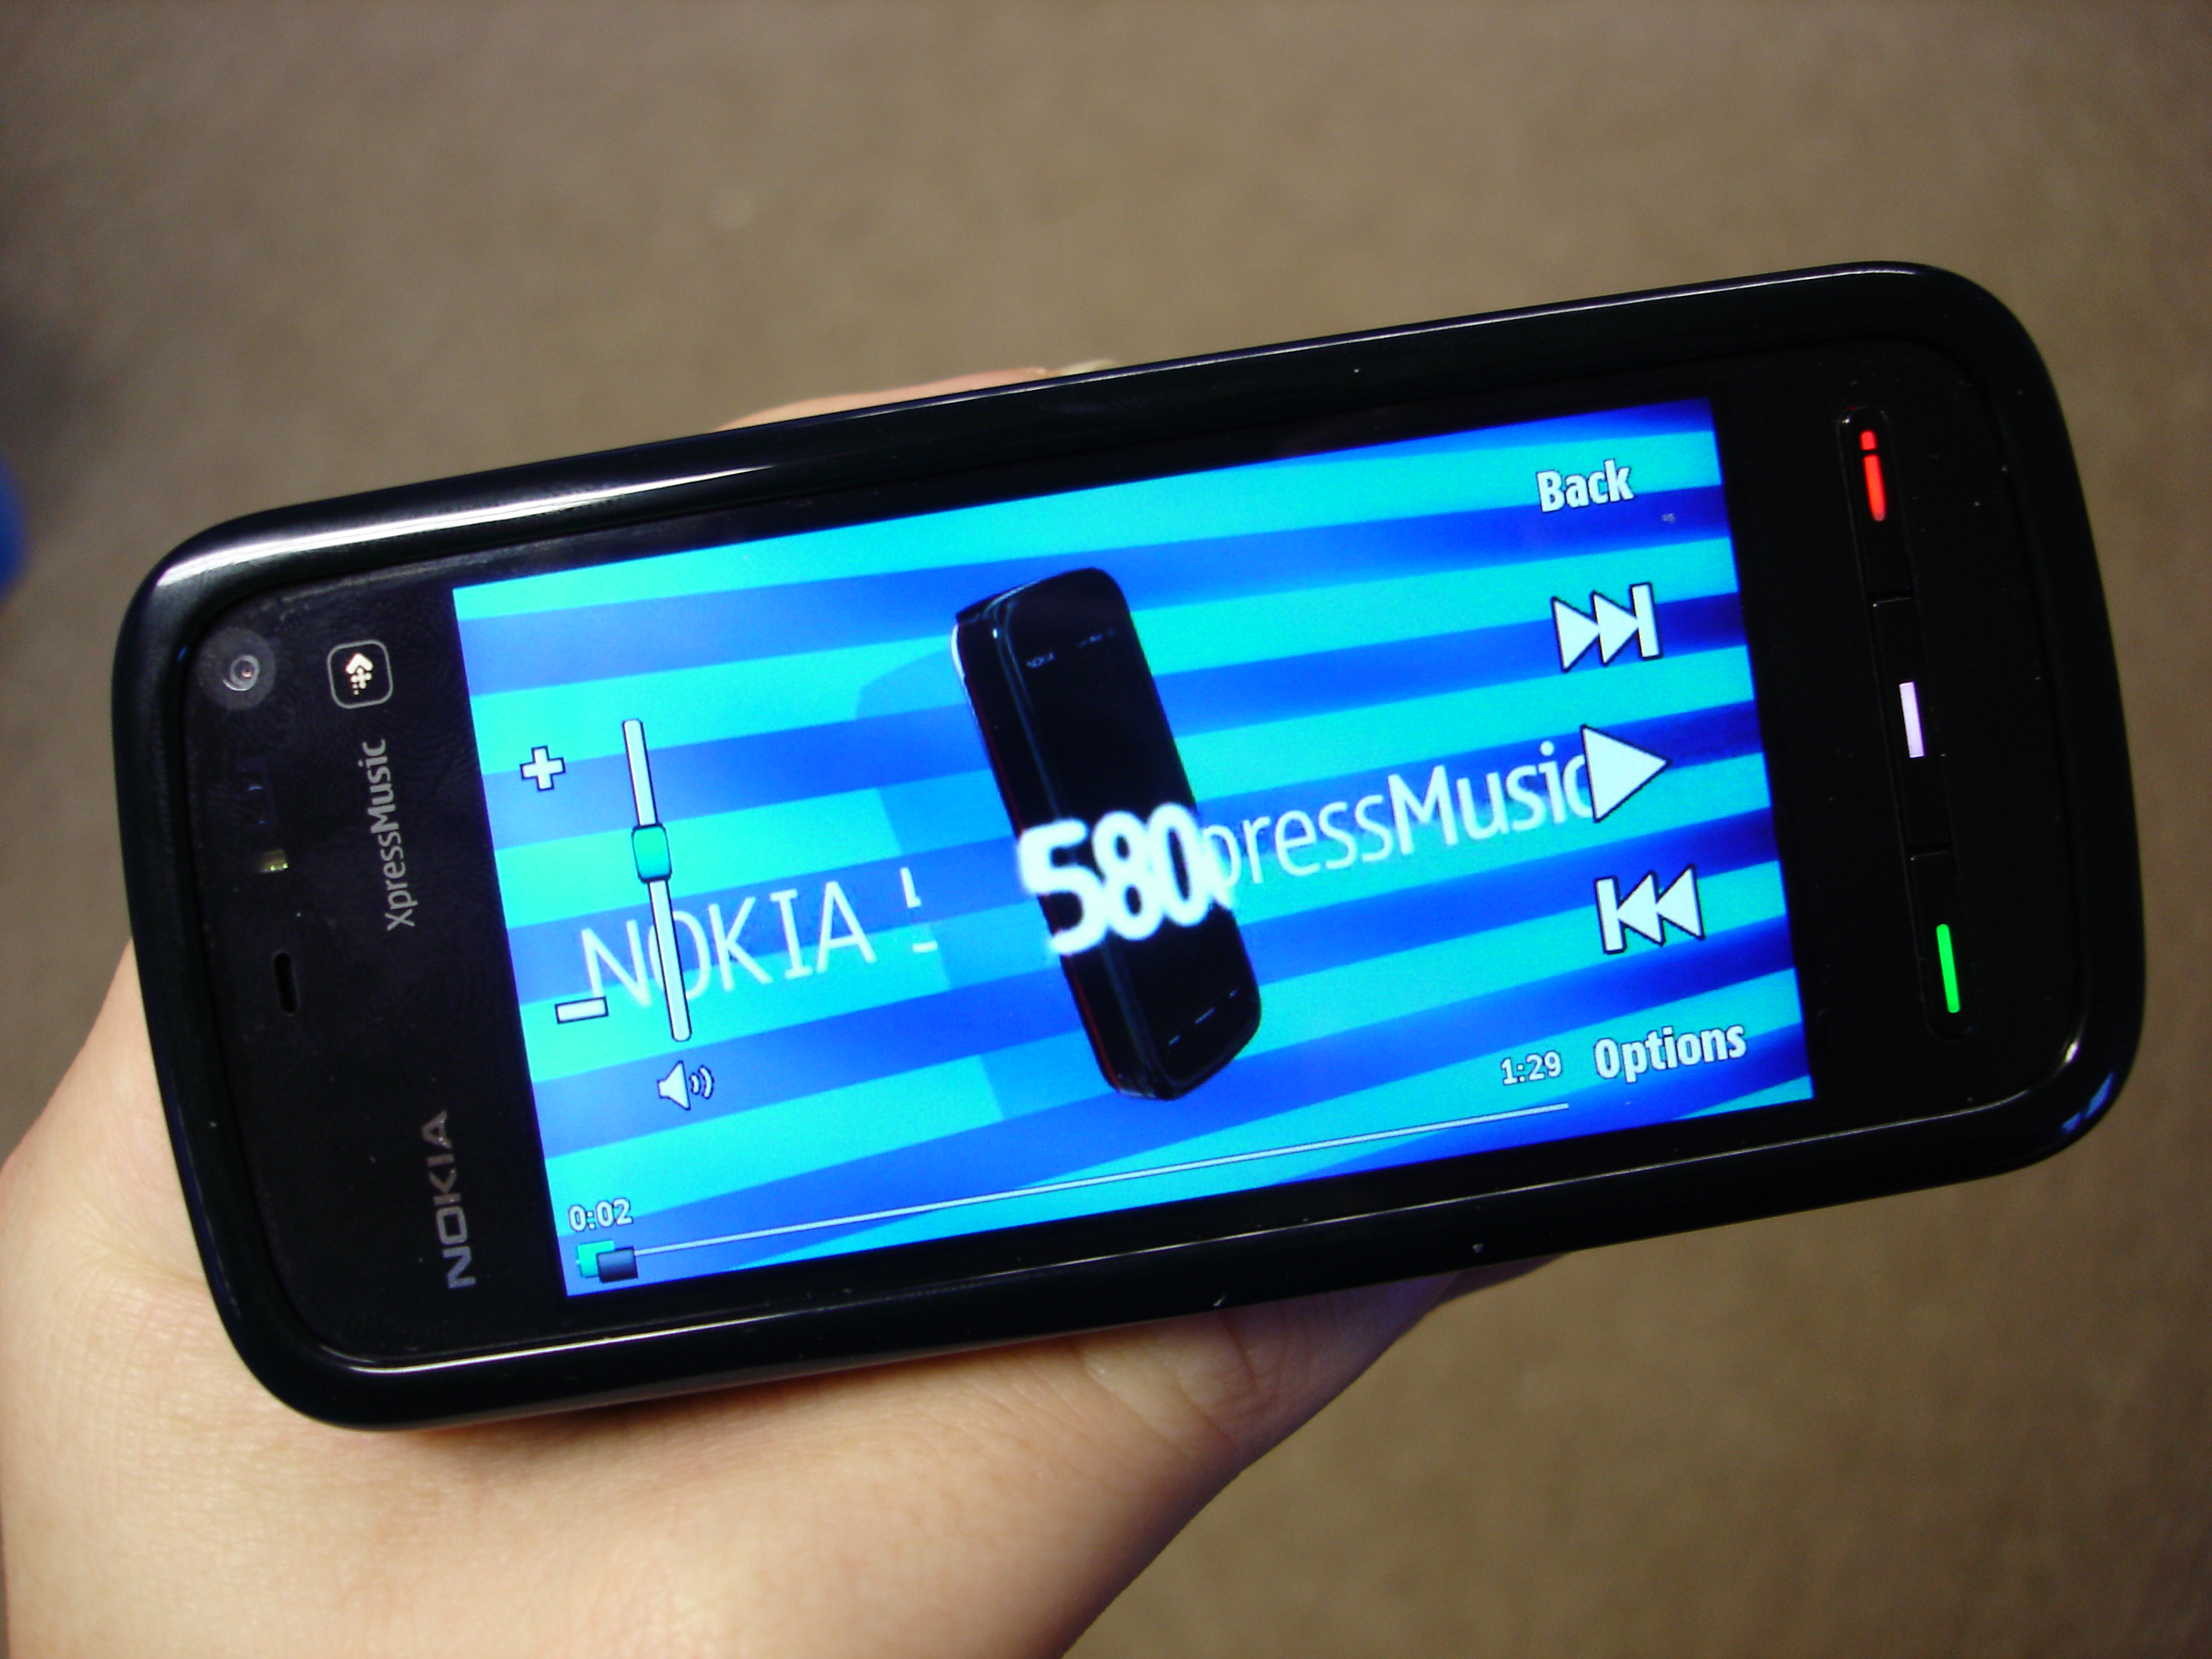 Nokia 5800 XpressMusic Preview - Part 1 review - All About Symbian